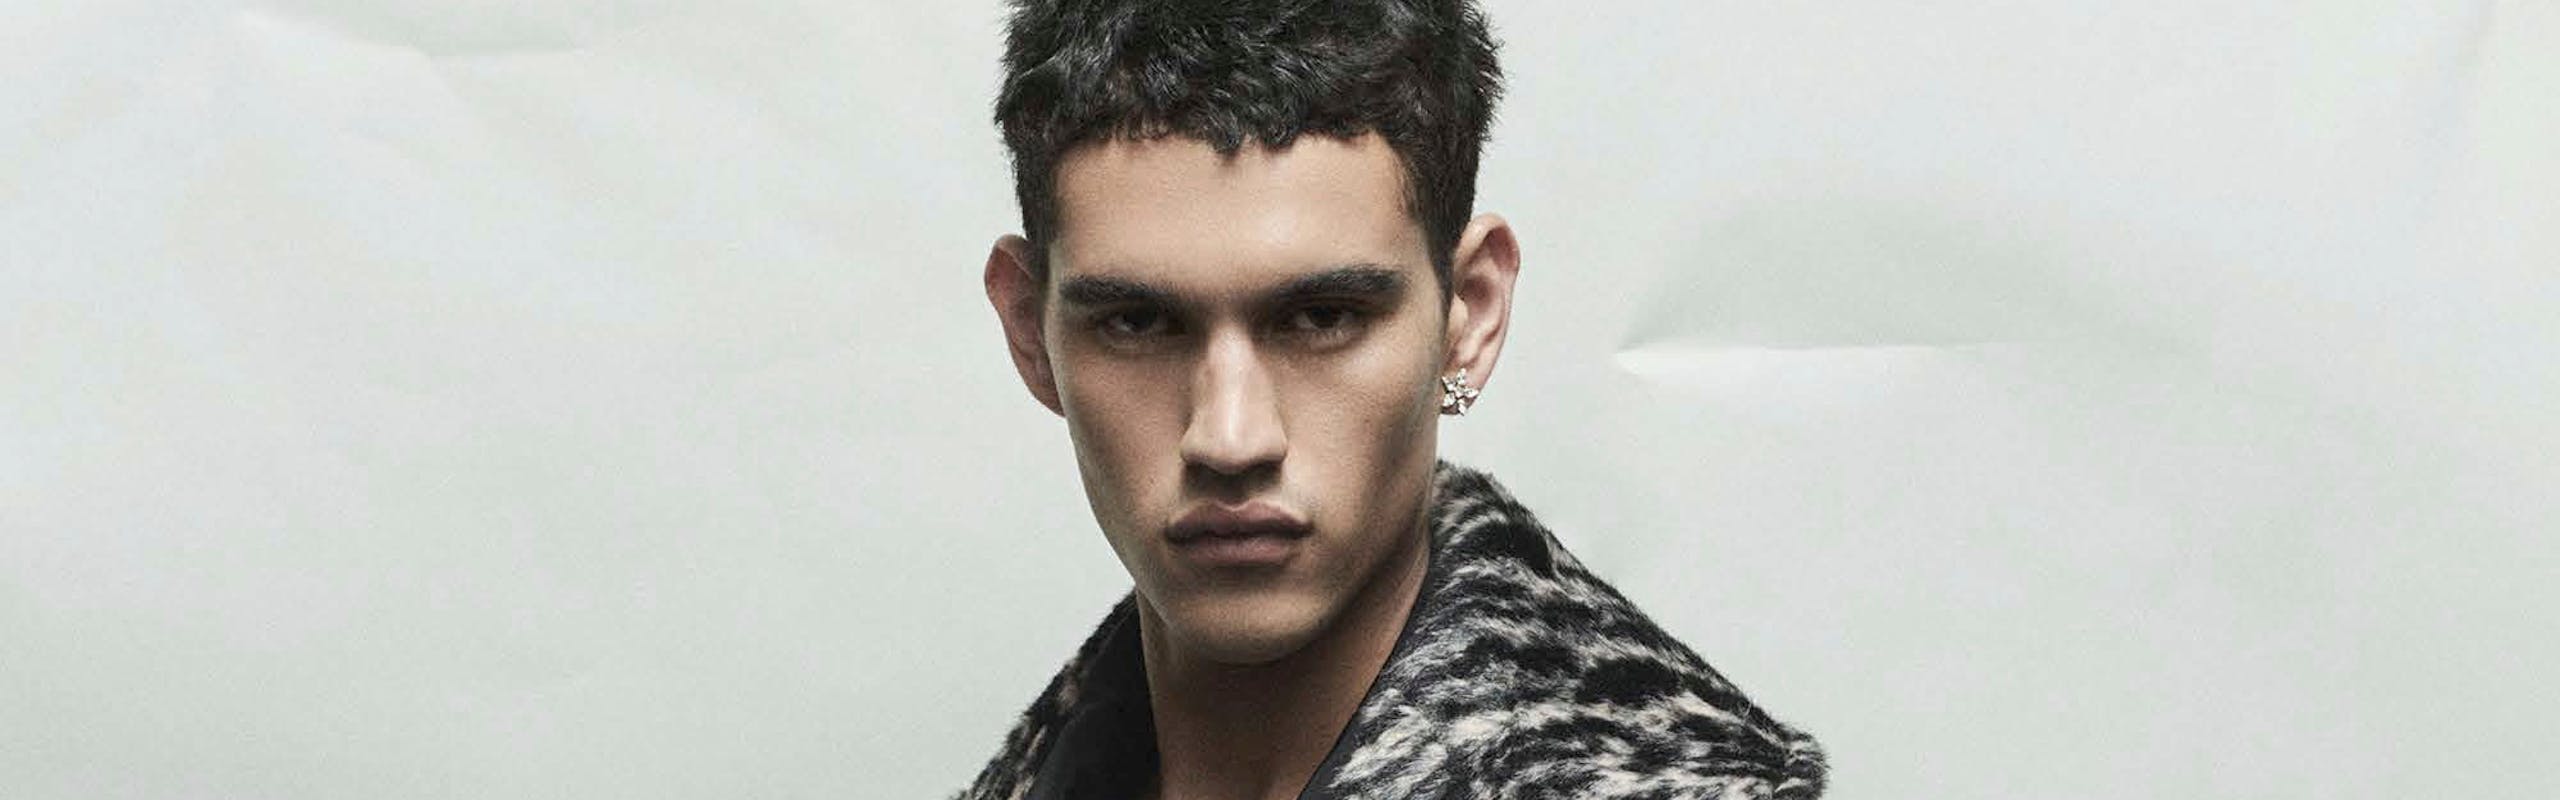 a model in a camel coat lined with grey and black print fur